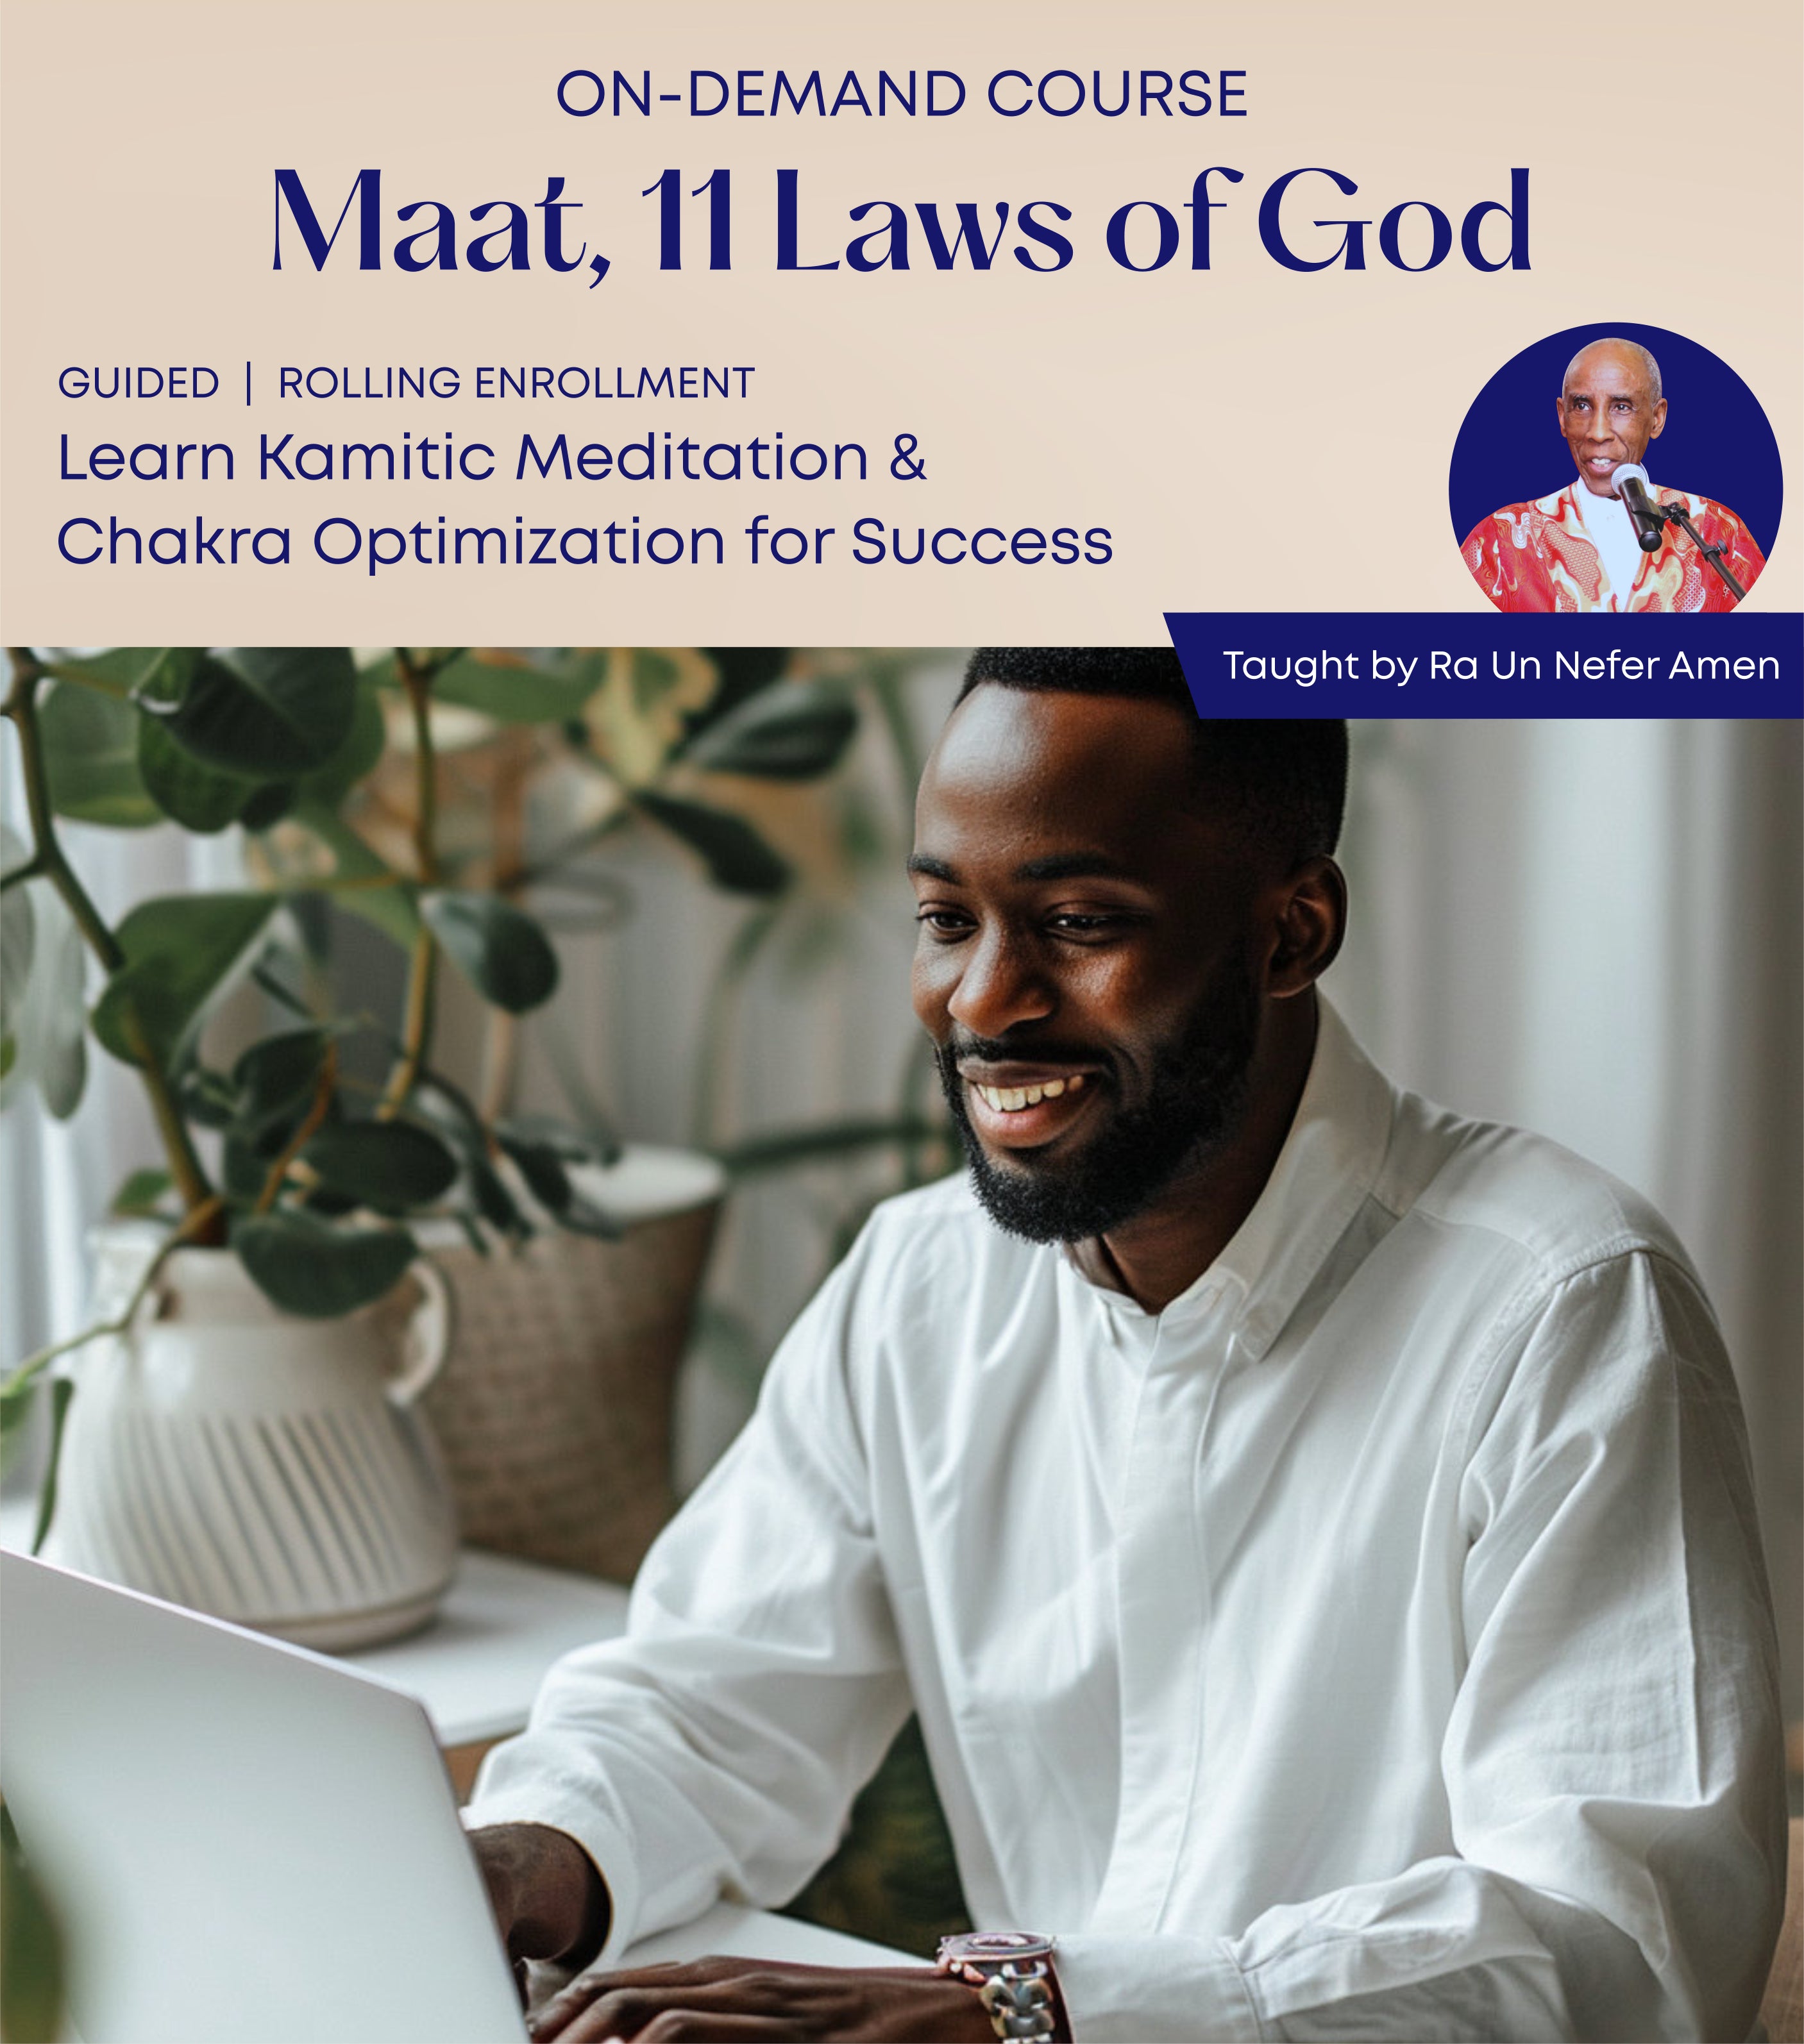 Maat, 11 Laws Course